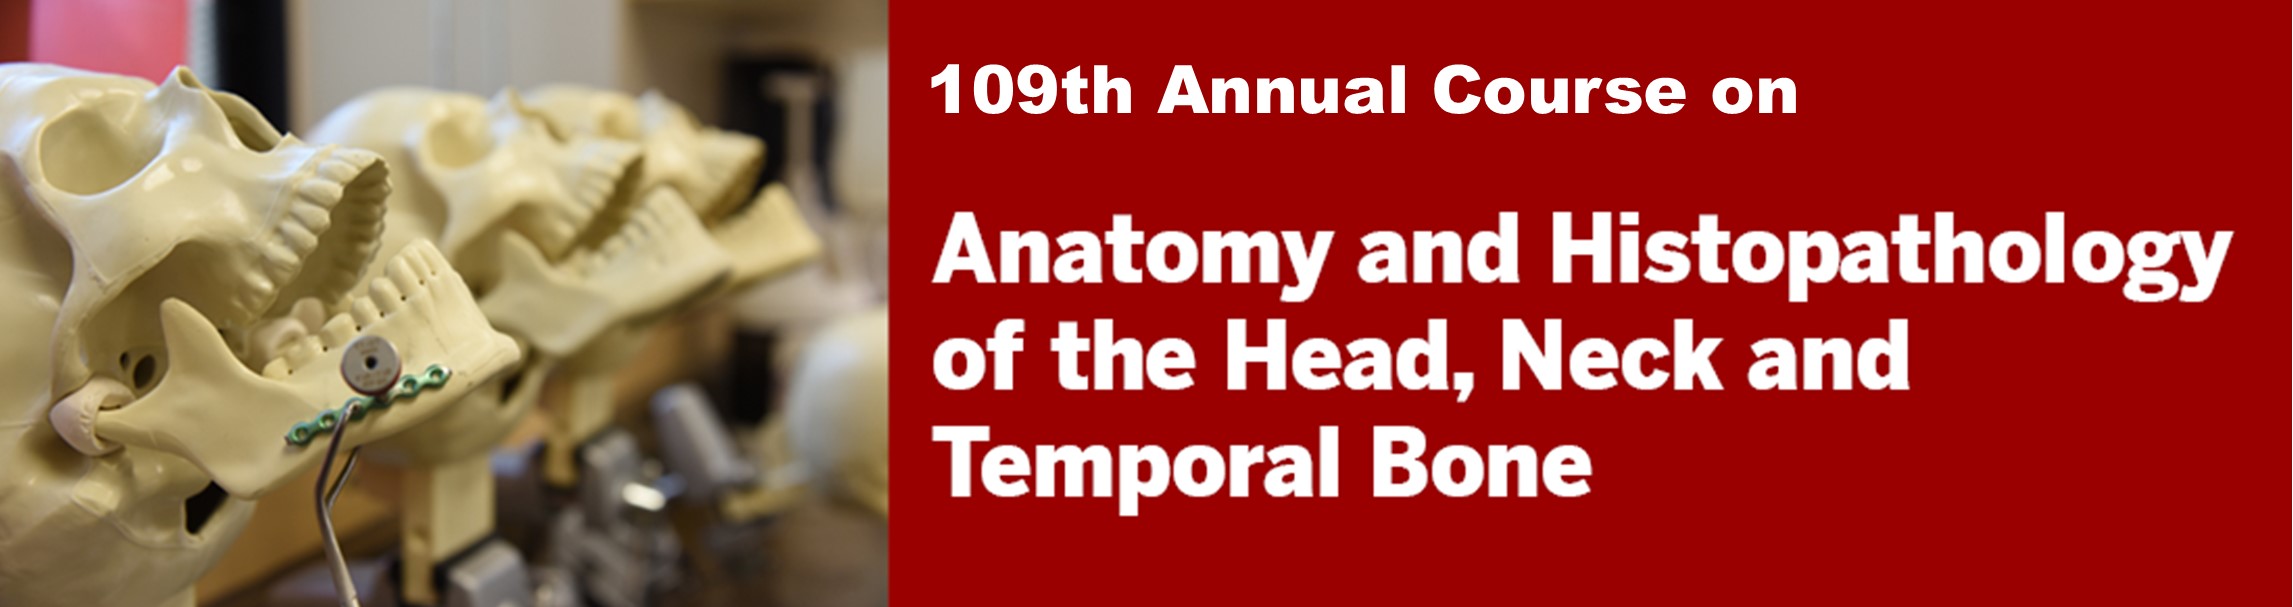 109th Annual Course on Anatomy & Histopathology of the Head, Neck & Temporal Bone Banner